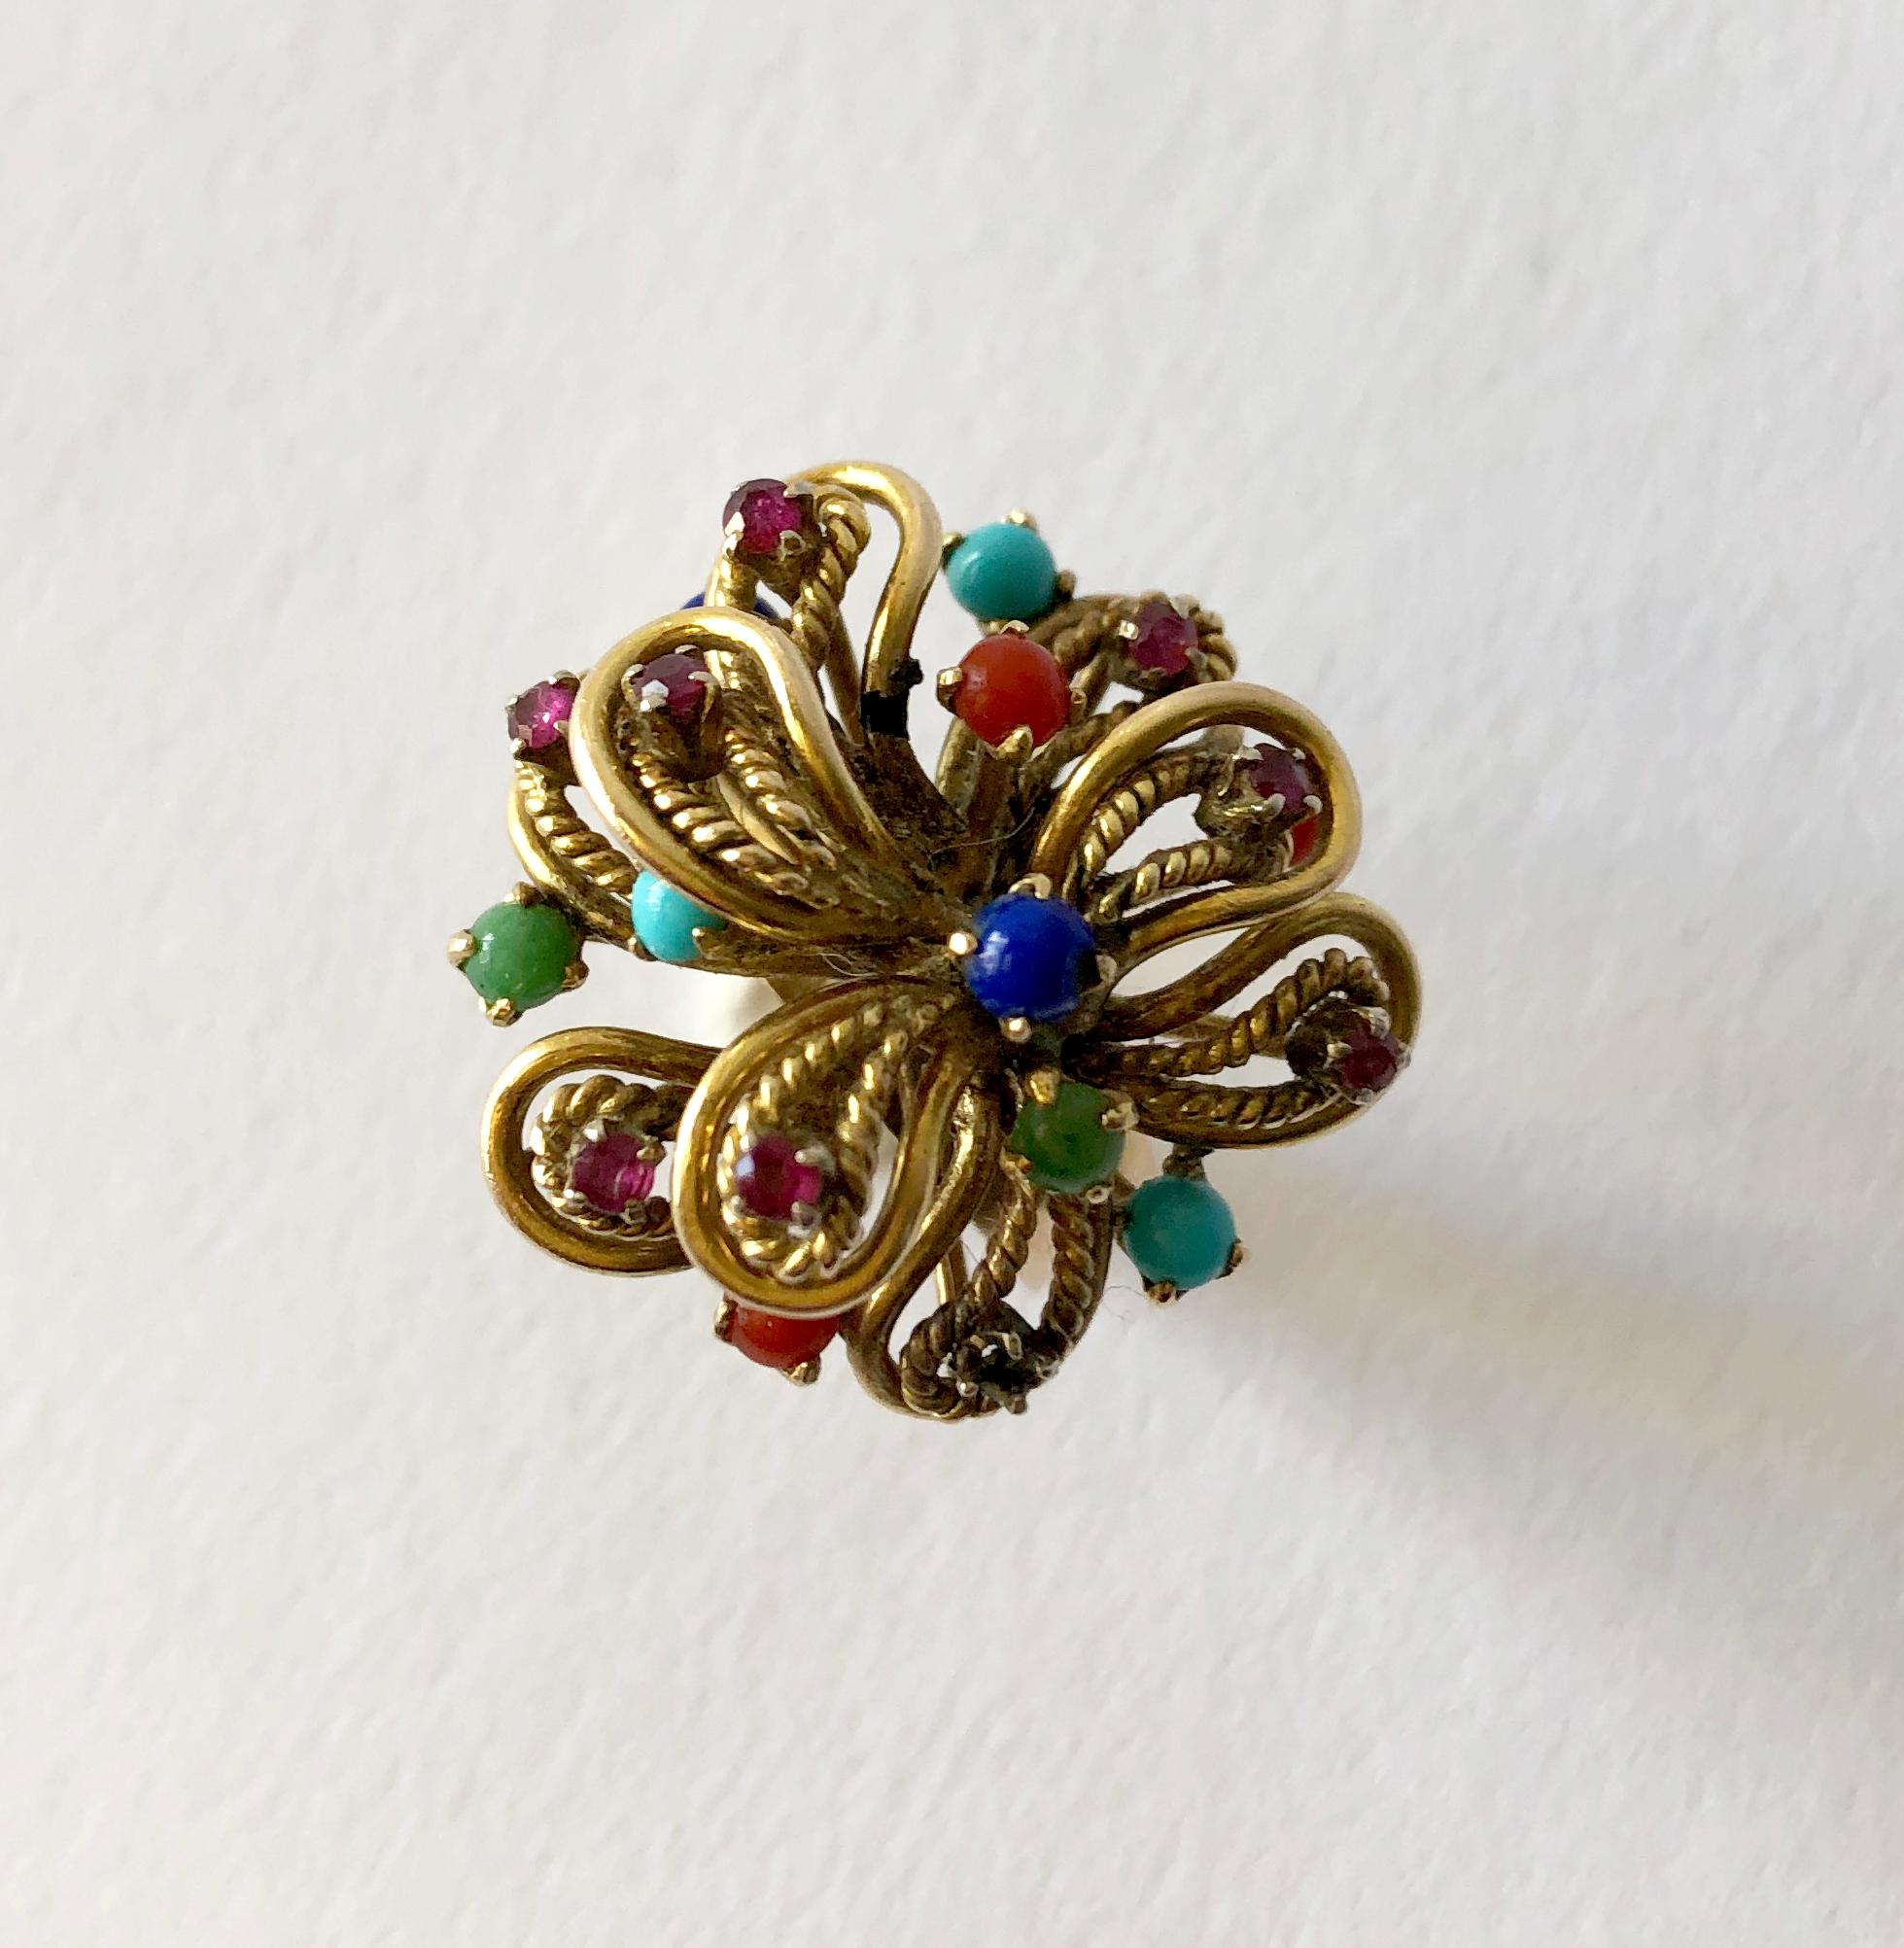 Multi gemstone ring set in 14K gold, possibly Italian circa 1960's.  Ring is a finger size 6  and is signed 14k.  In very good vintage condition.  10.9 grams.